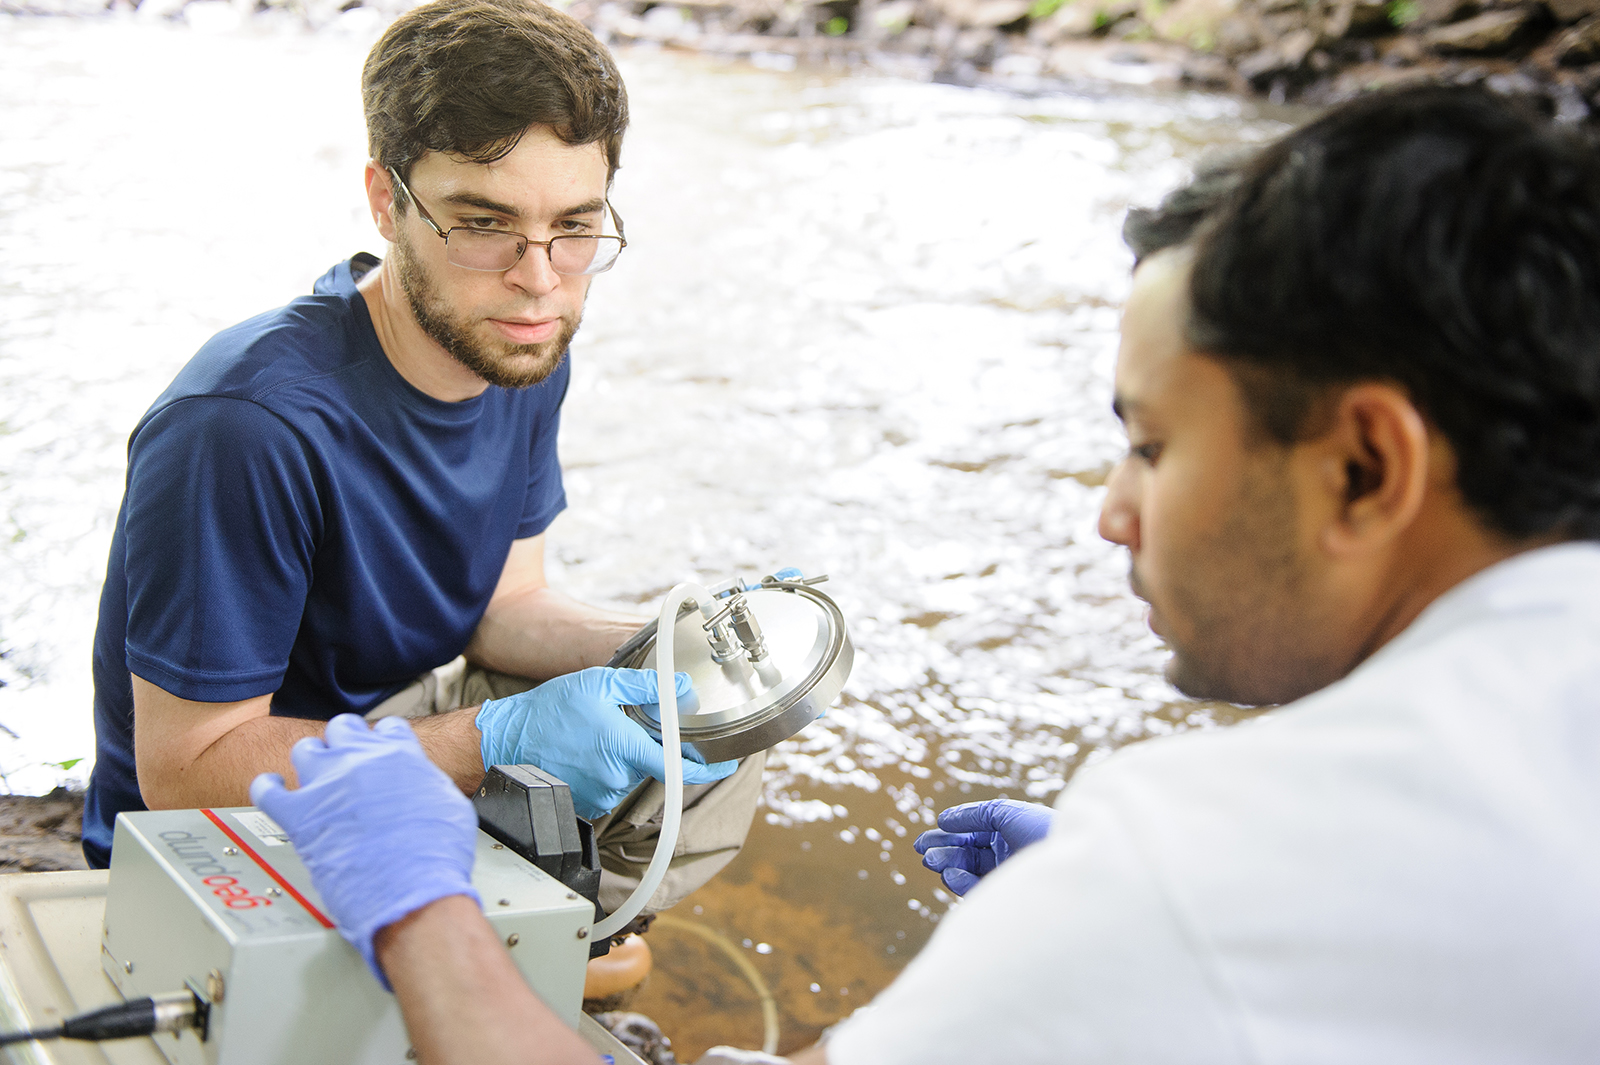 EPA Grant Assists in Understanding Wastewater Issues in Rural Alabama